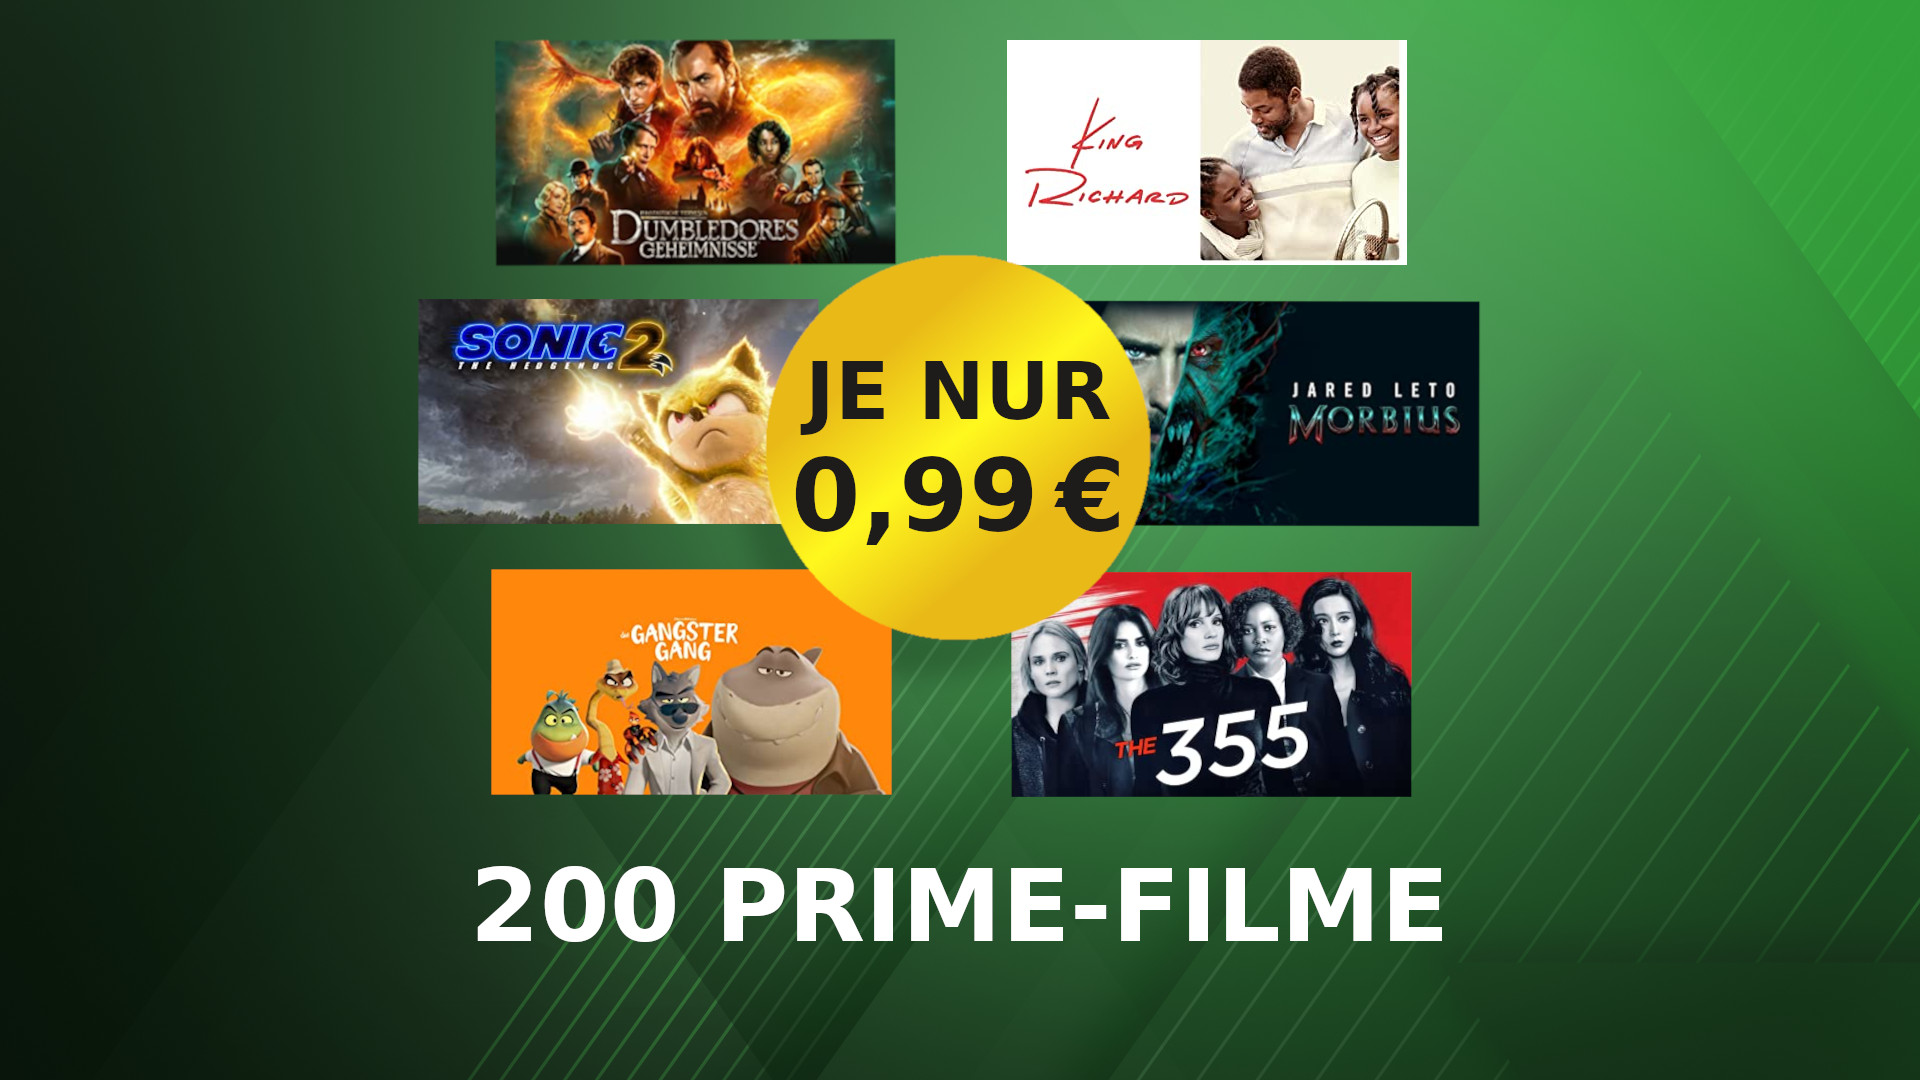 Only 99 cents each: now rent 200 films cheaply from Amazon Prime Video